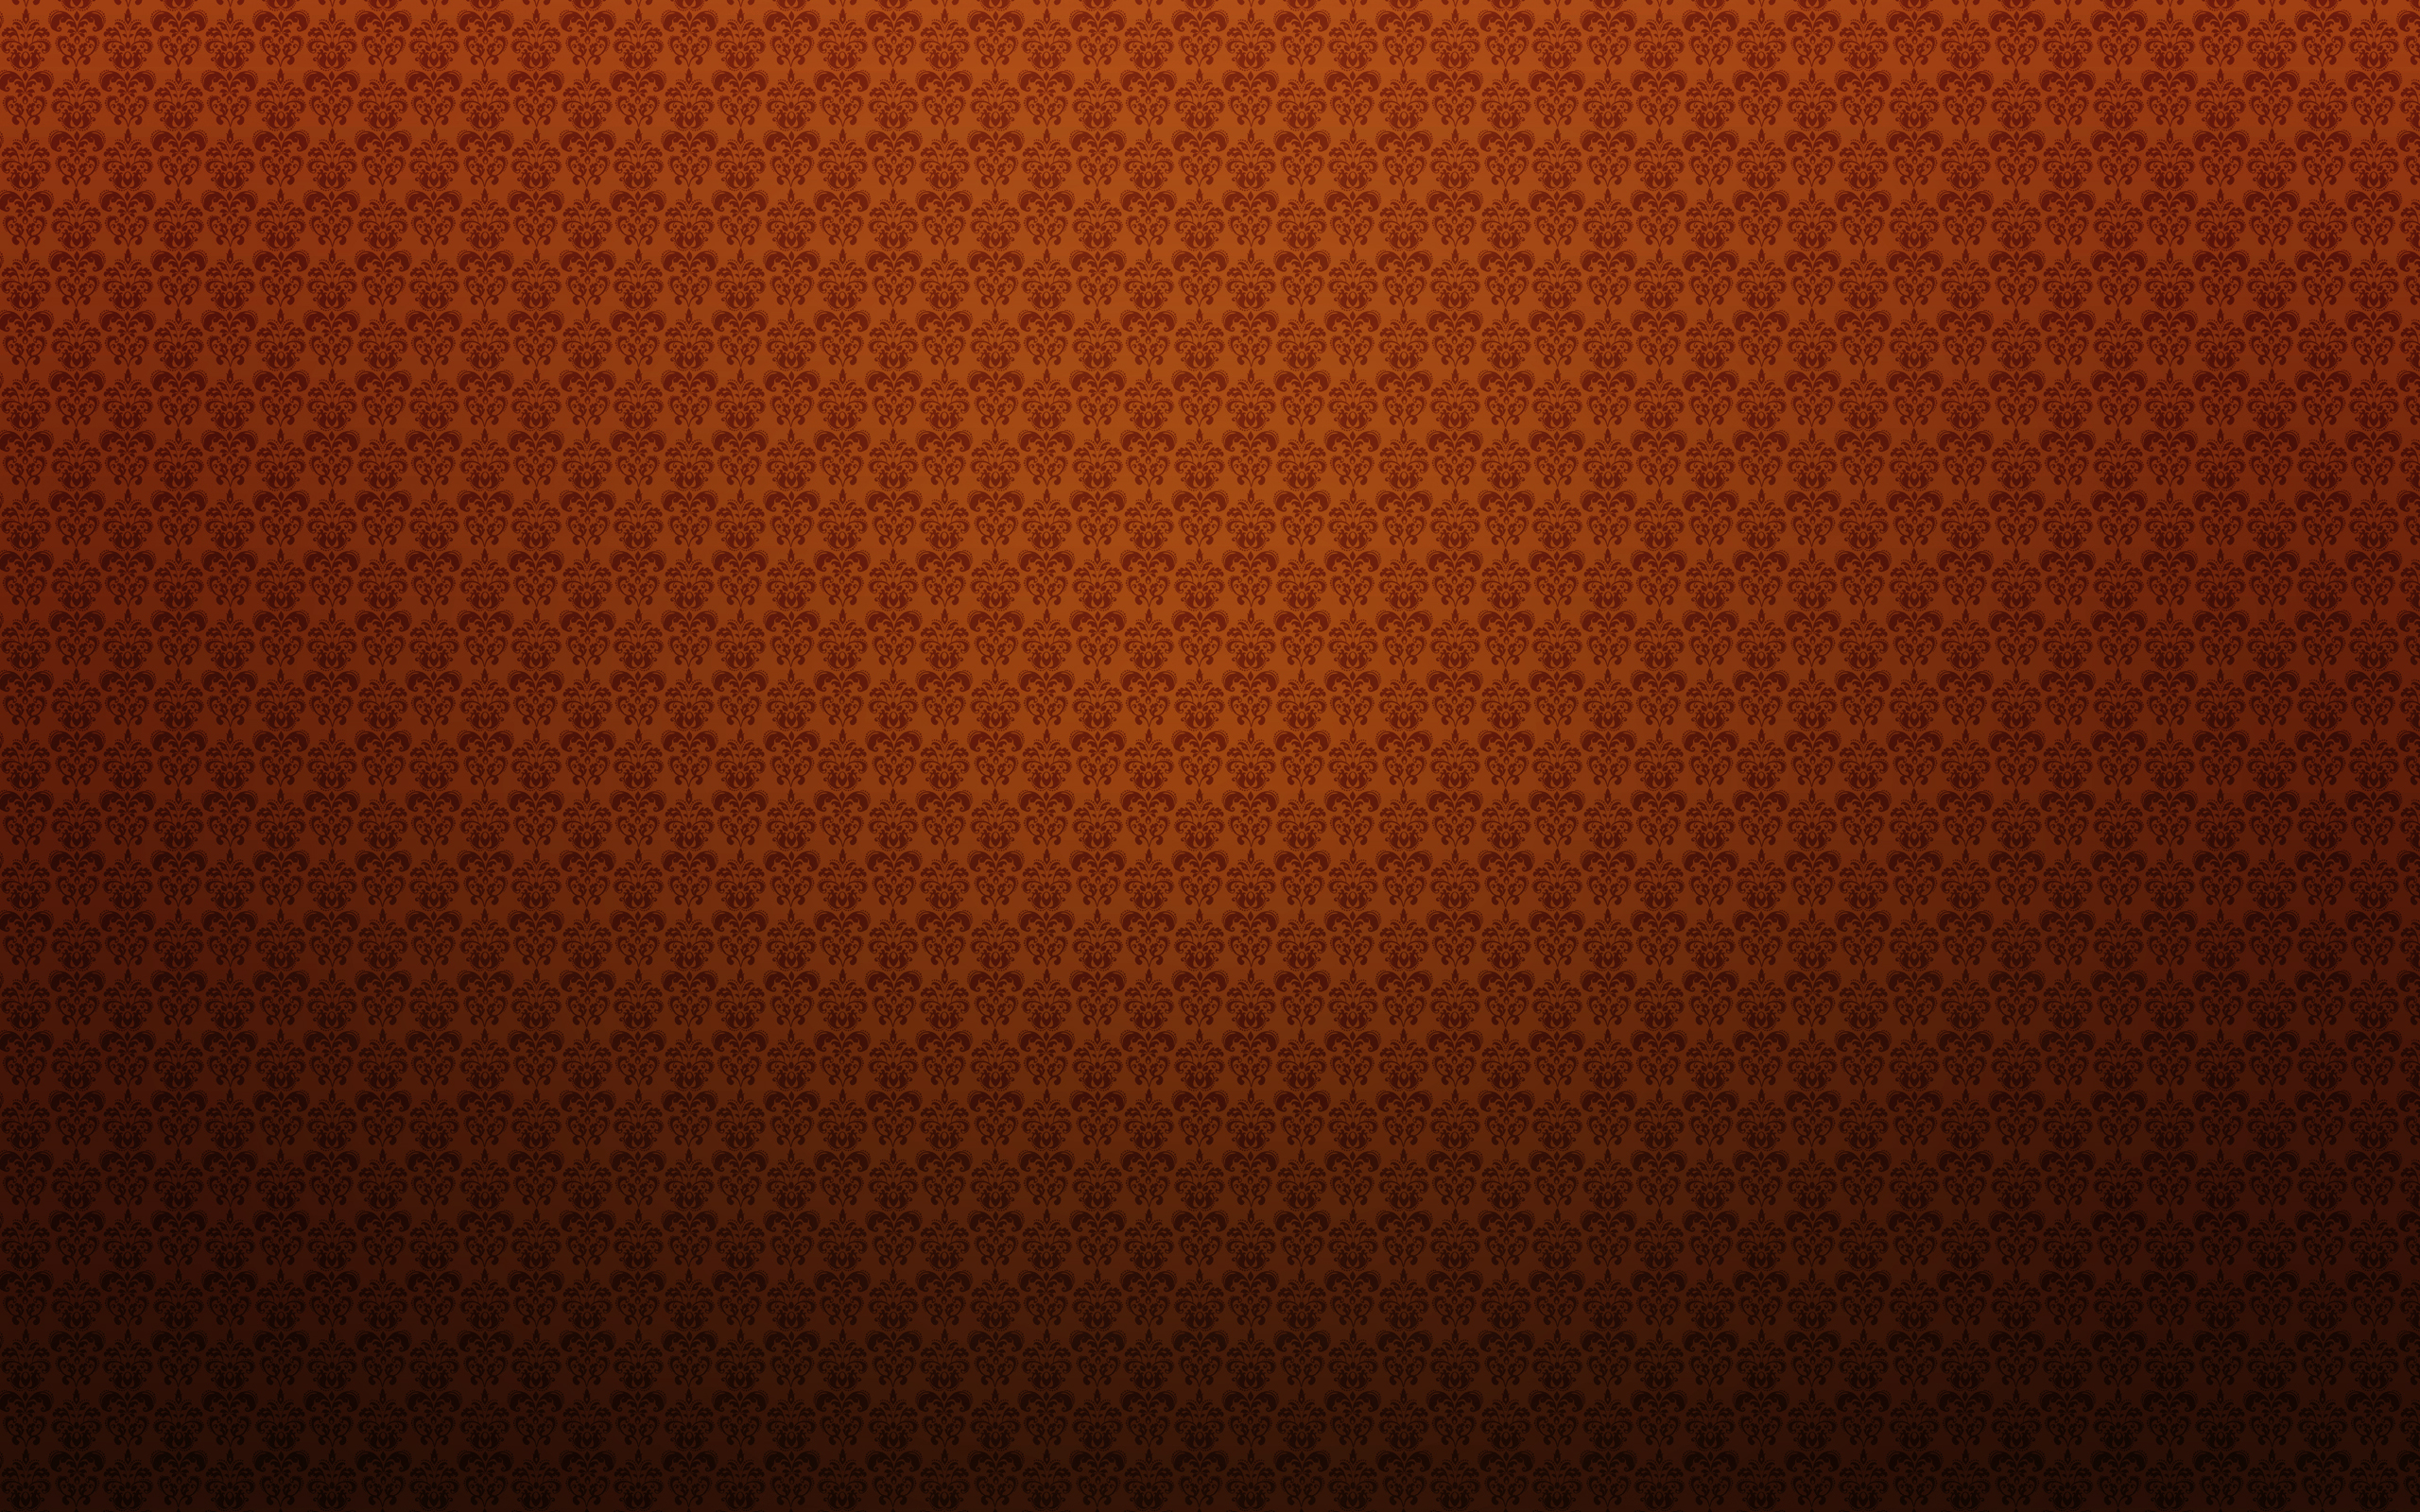 Free download Background Textures Related Keywords amp Suggestions ...